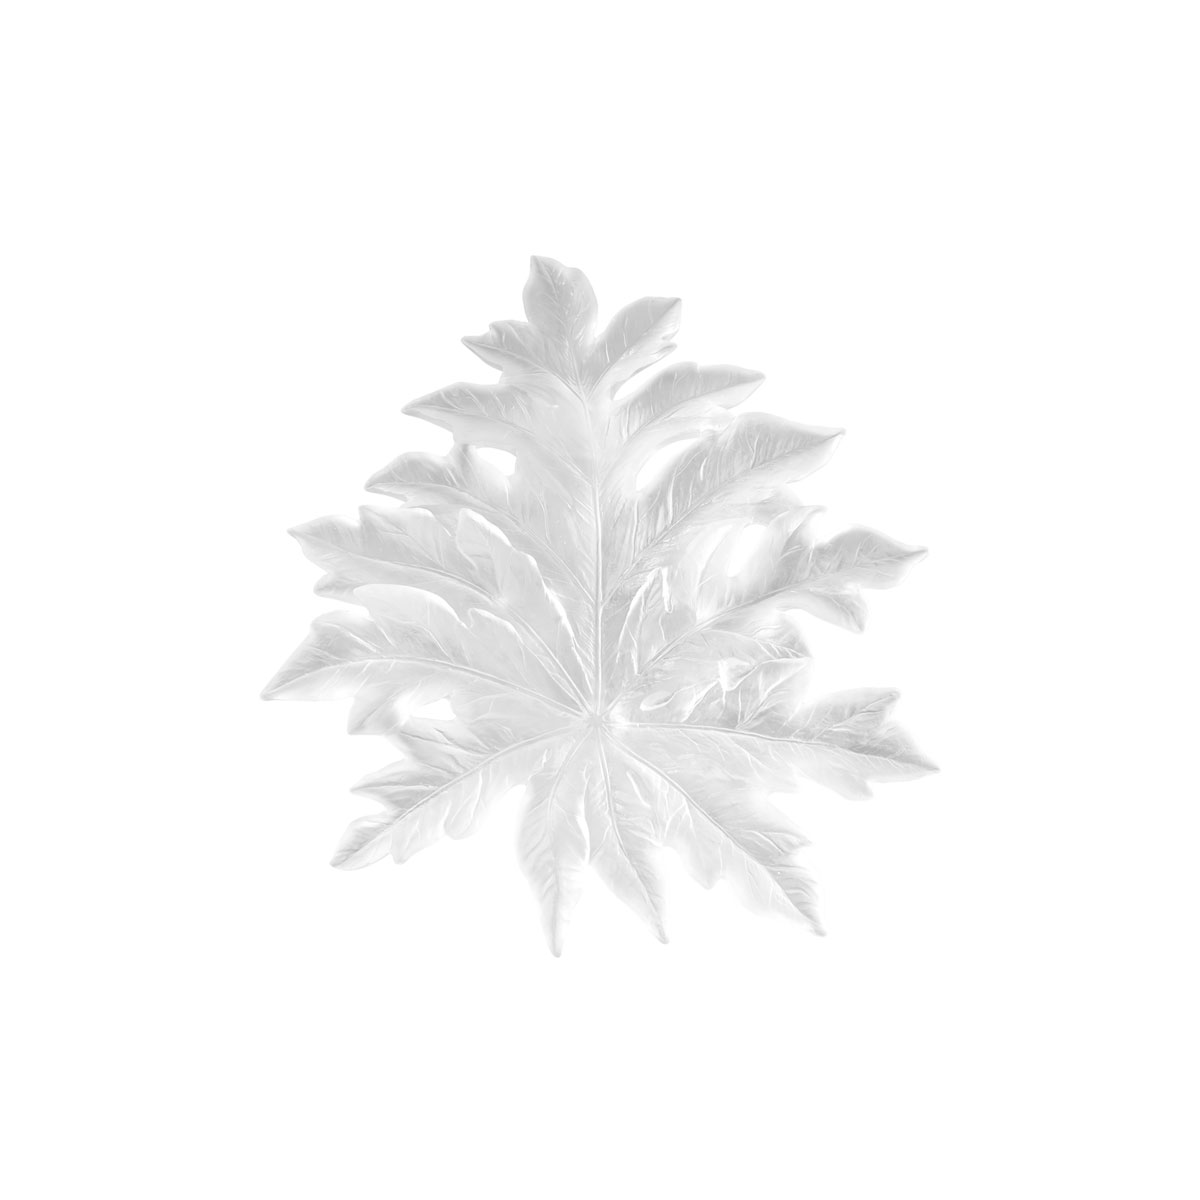 Daum Small Short-Fixture Borneo Wall Leaf in White by Emilio Robba, Sconce